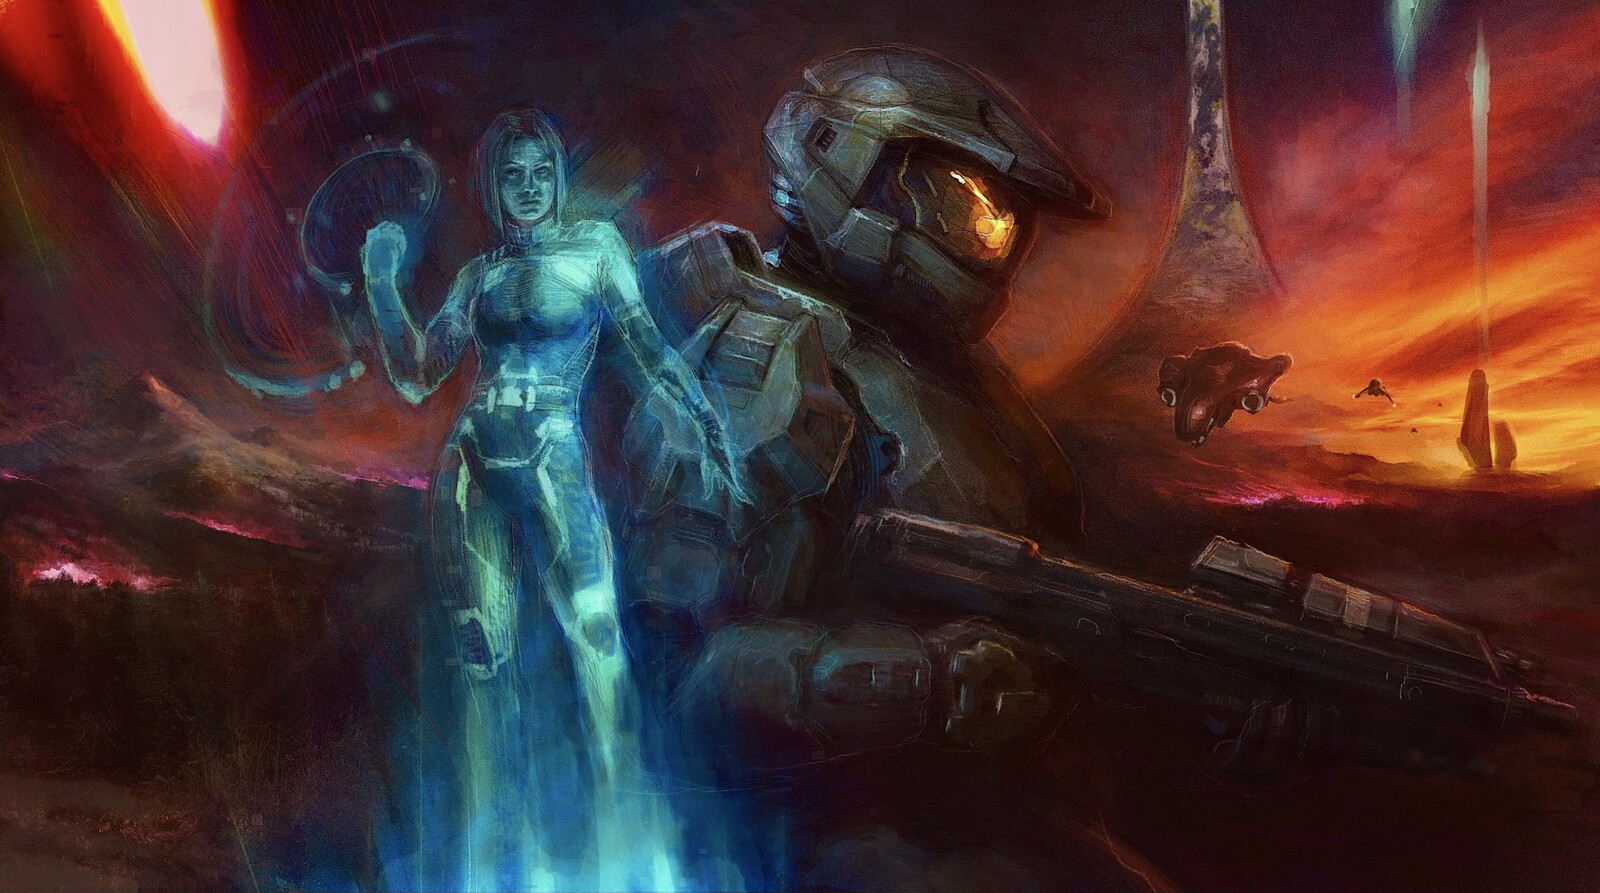 A Team of Two - Master Chief and Cortana